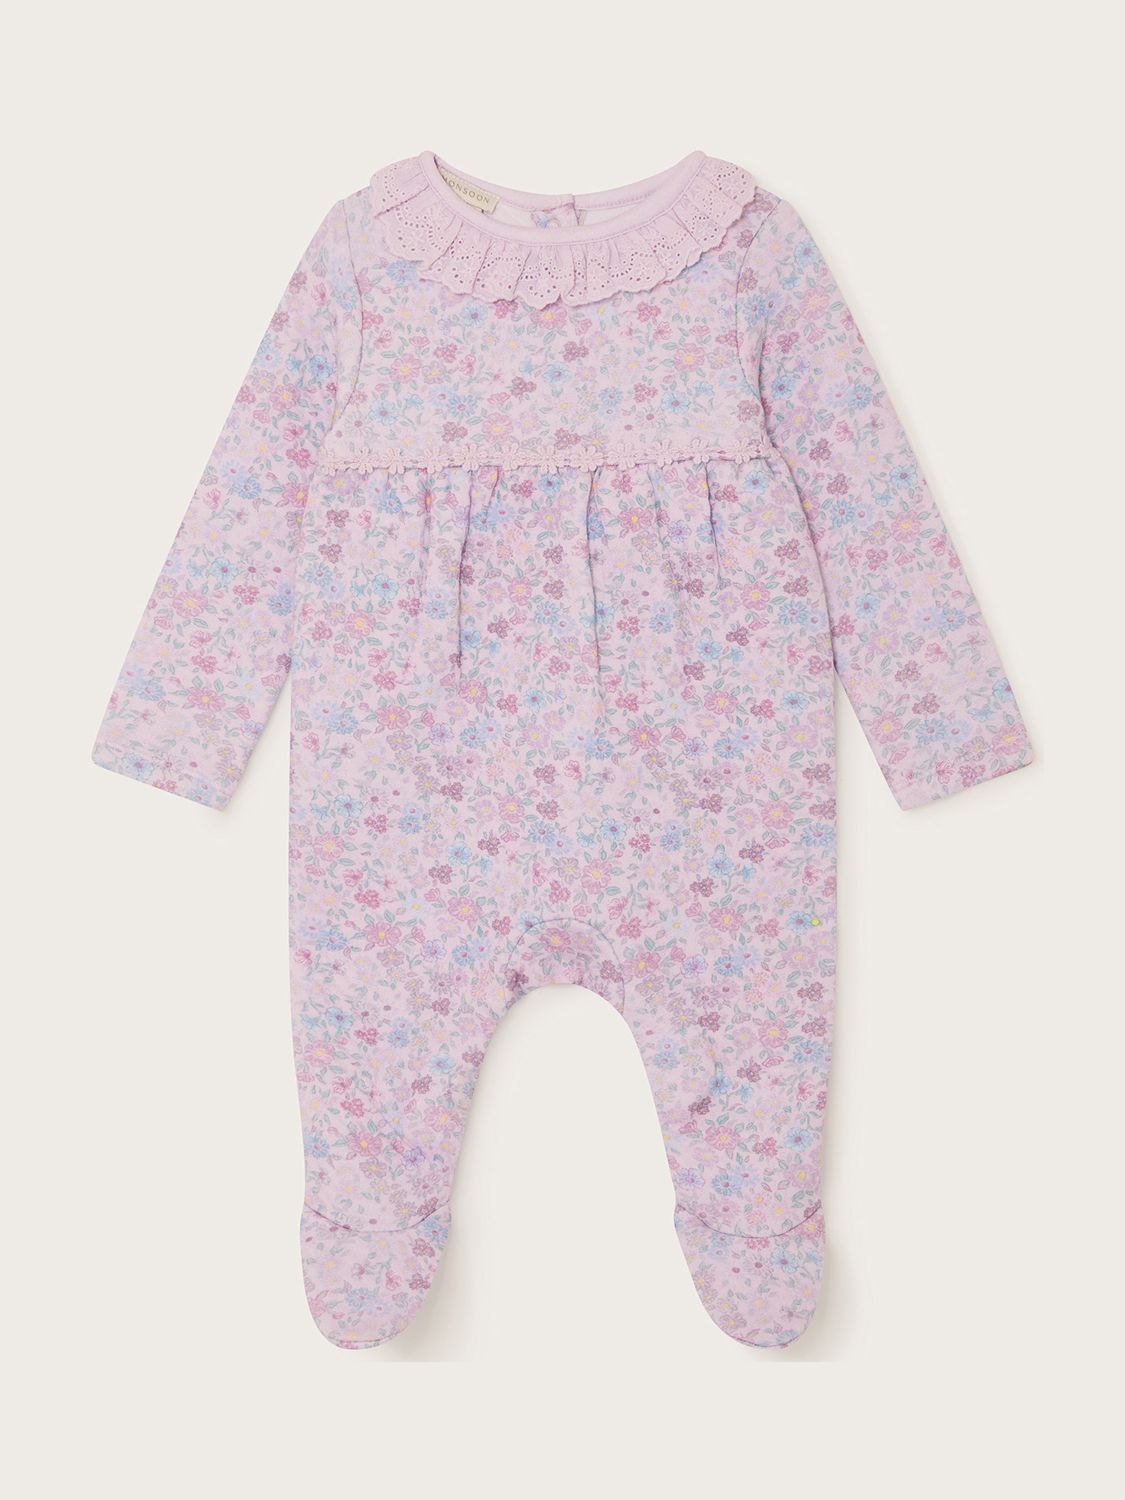 Monsoon Baby Ditsy Floral Quilt Sleepsuit, Pink at John Lewis & Partners